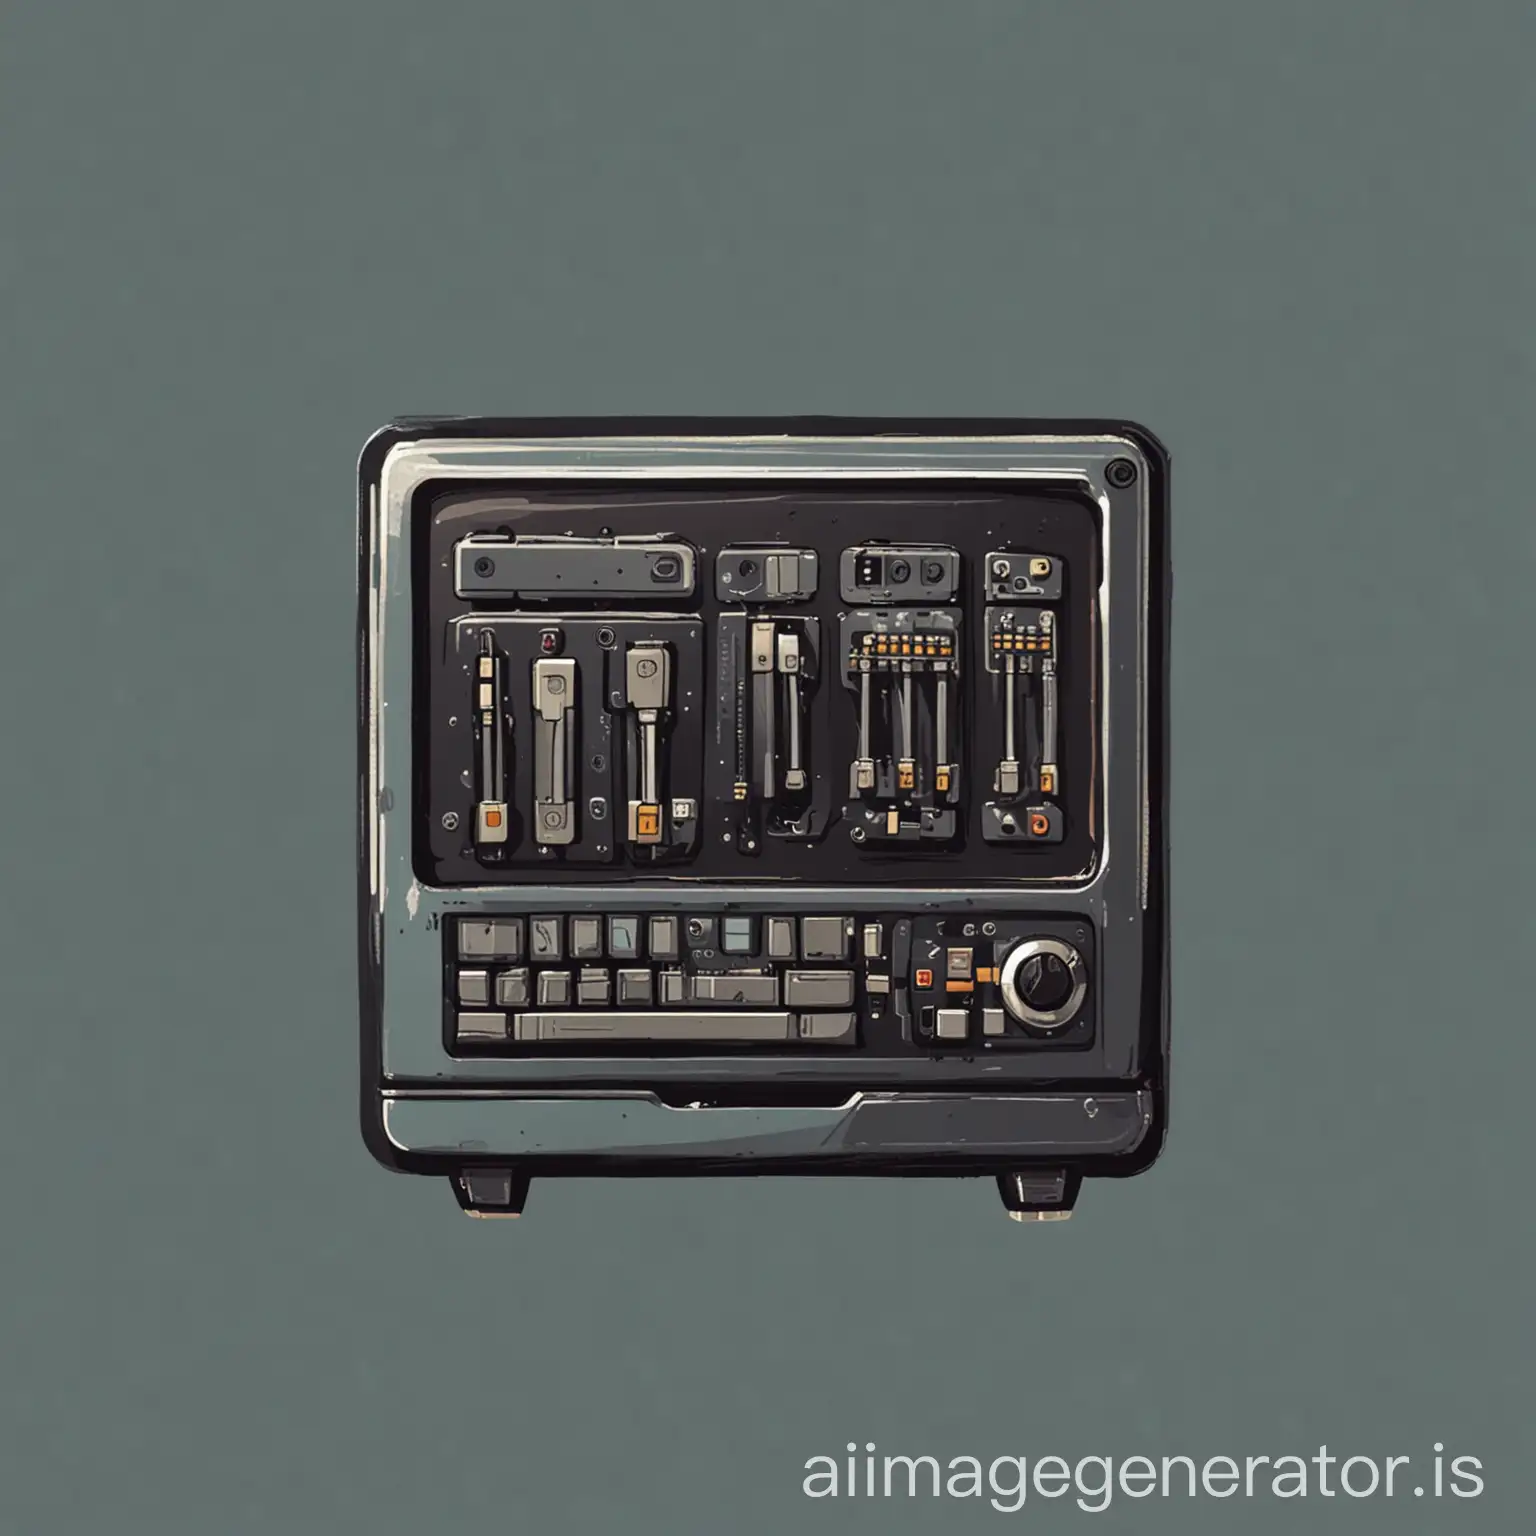 a cartoon icon of a computers hardware
